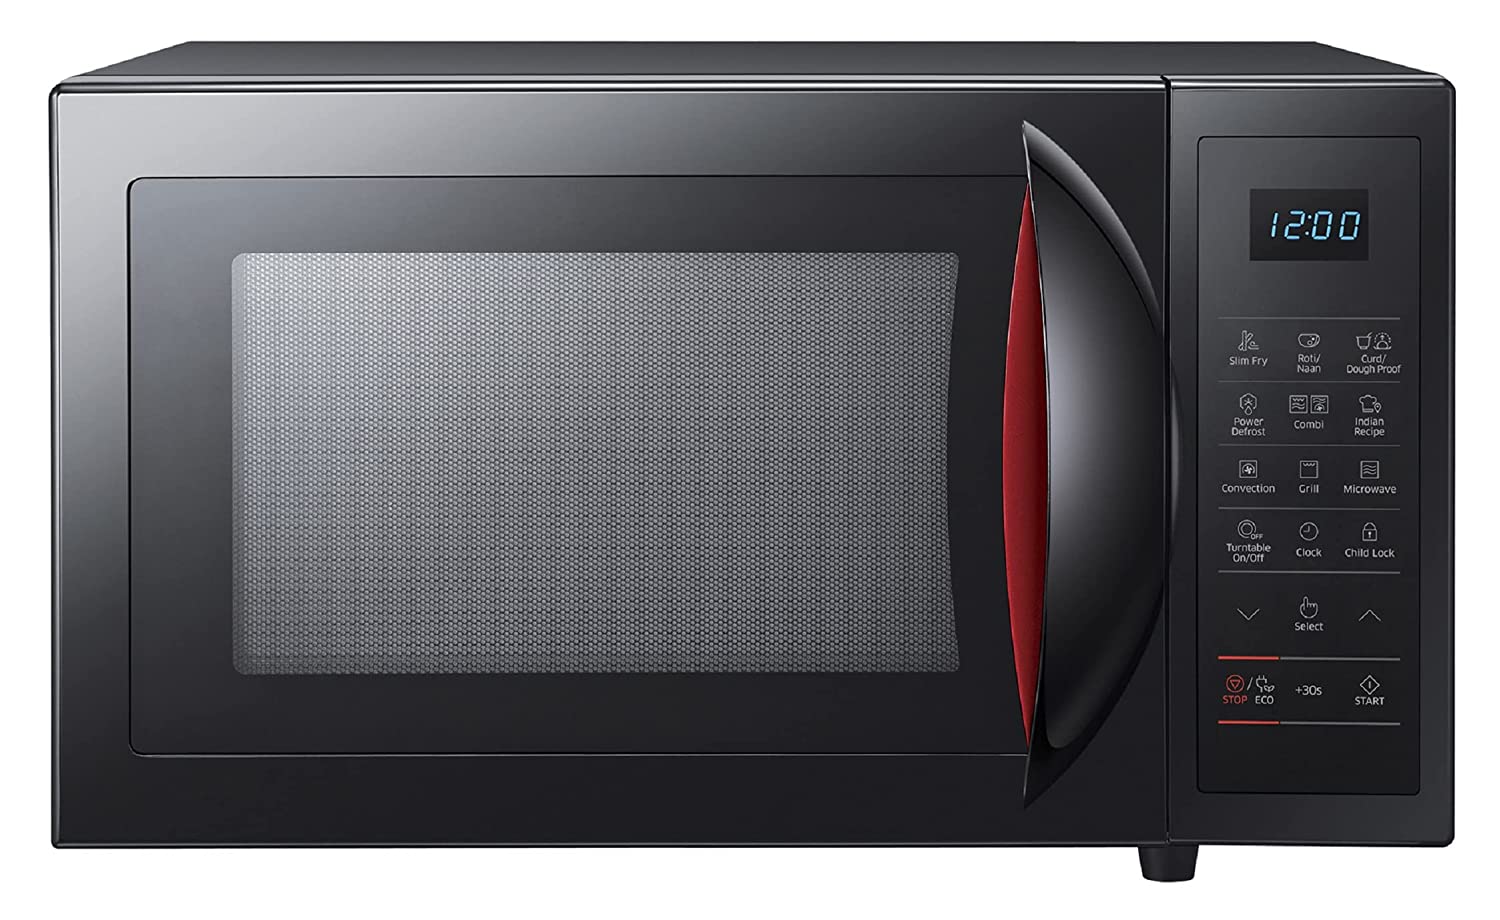 Samsung Convection Microwave Oven Review